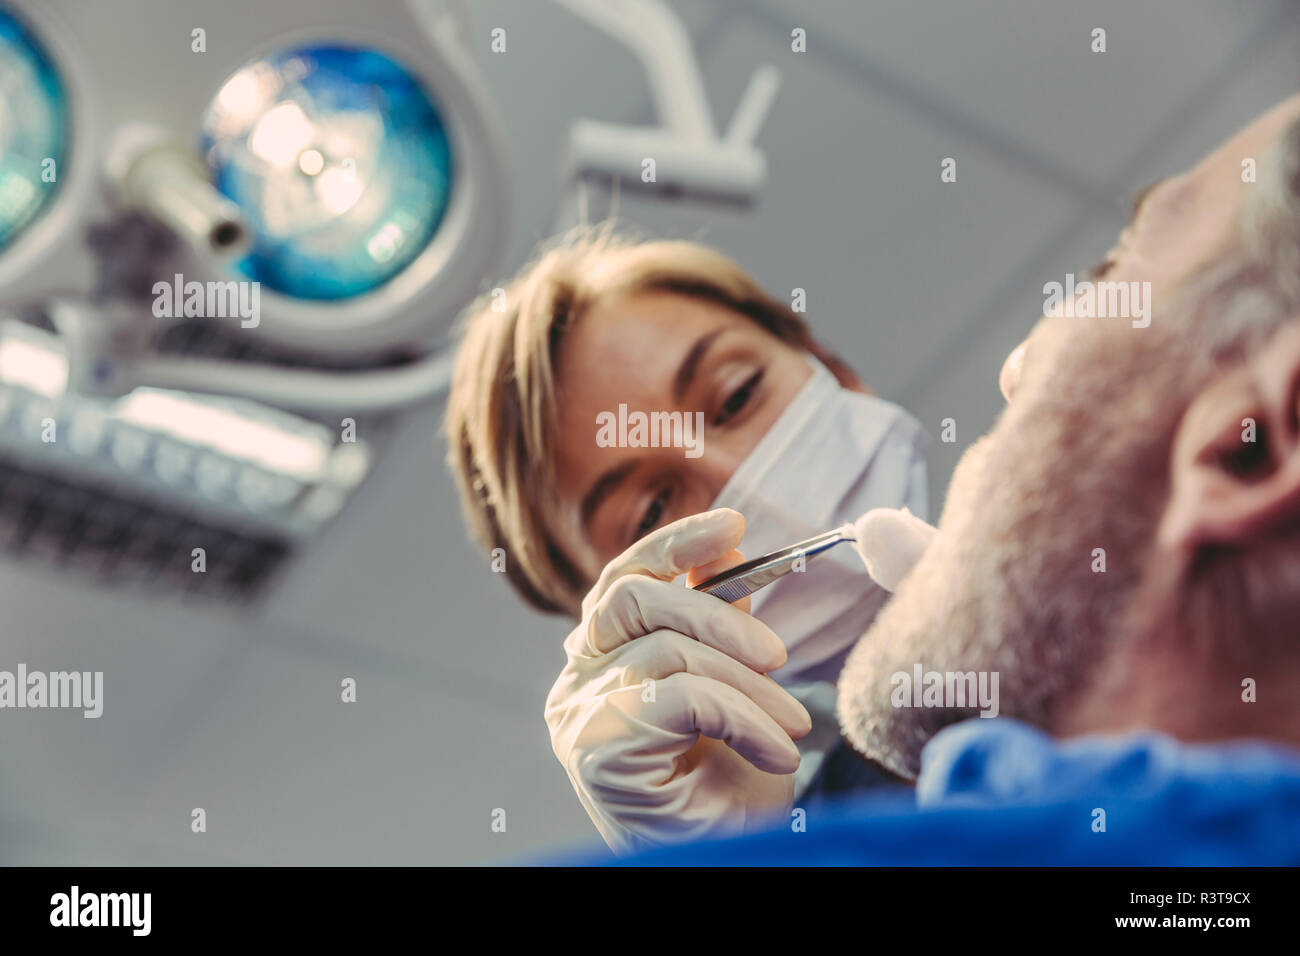 Dental surgeon during surgical procedure on a patient Stock Photo